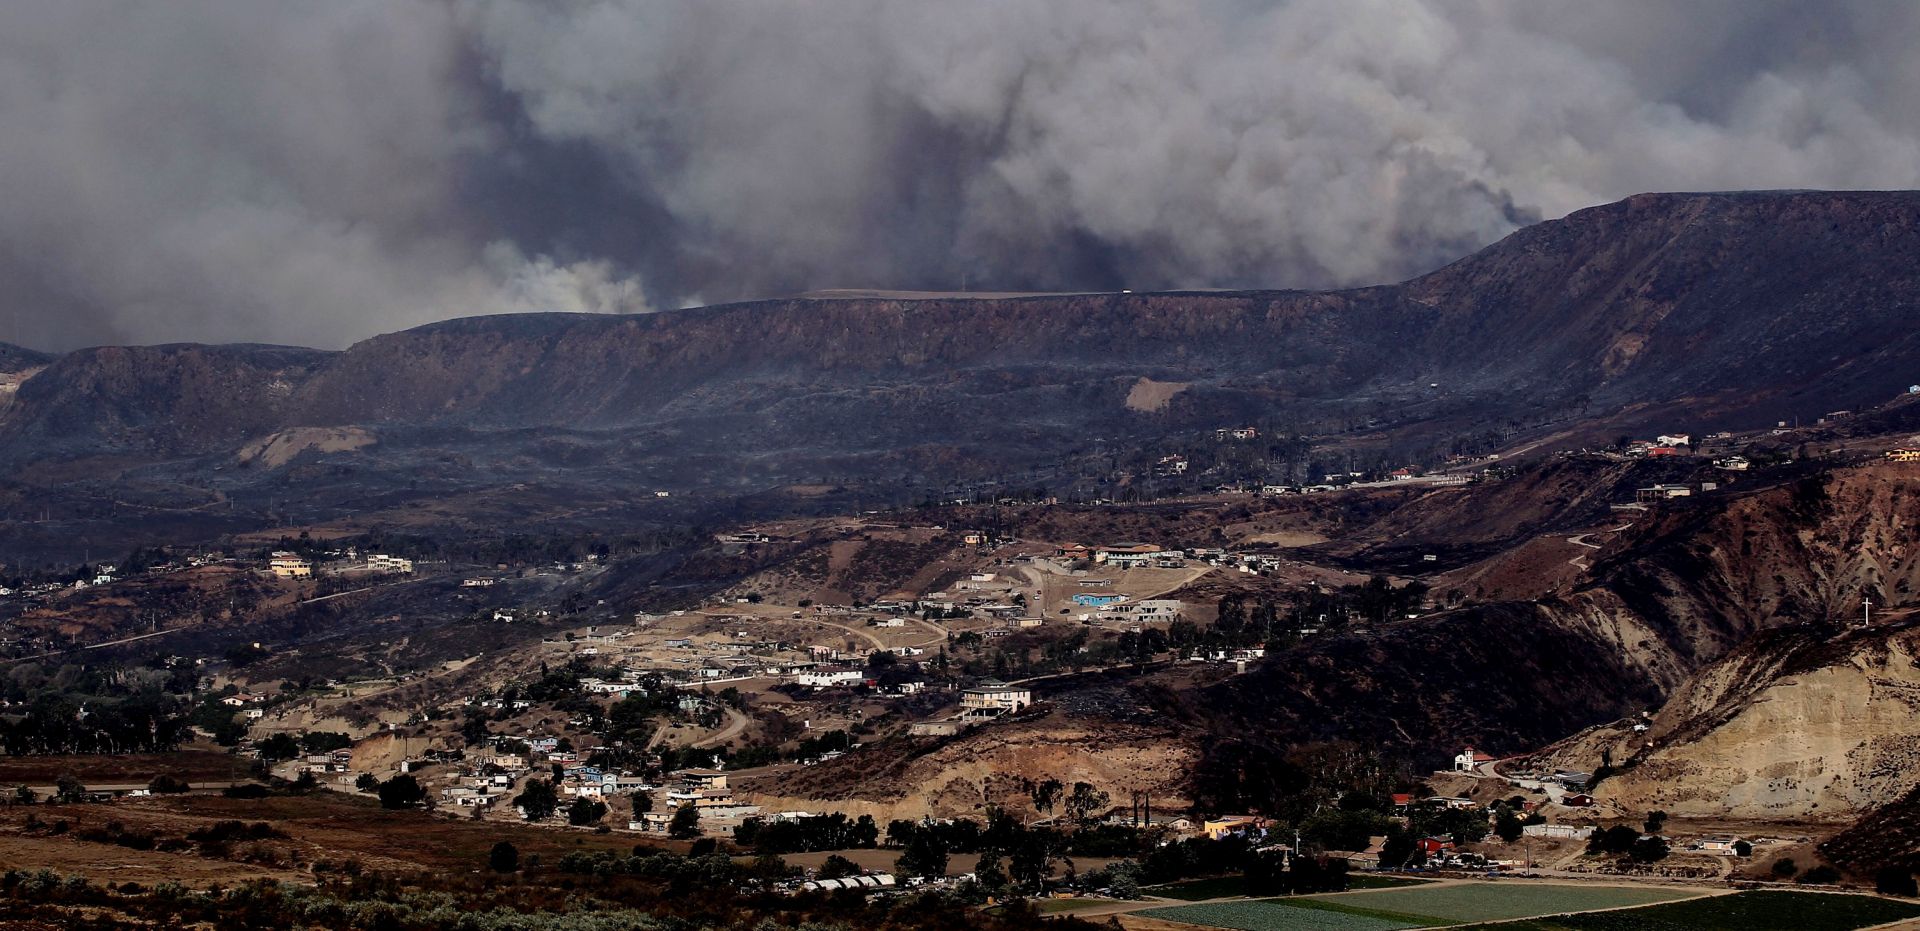 epa07950105 General view of a fire, in the city of Tijuana, Baja California, Mexico, 25 October 2019. The Mexican State of Baja California, northwestern Mexico, was impacted in the last two days by the Santa Ana weather condition, authorities said. The Santa Ana condition or Santa Ana winds are extremely dry winds that appear in the climate of southern California, the United States and northern Baja California, Mexico, during the fall and early winter.  EPA/ALEJANDRO ZEPEDA